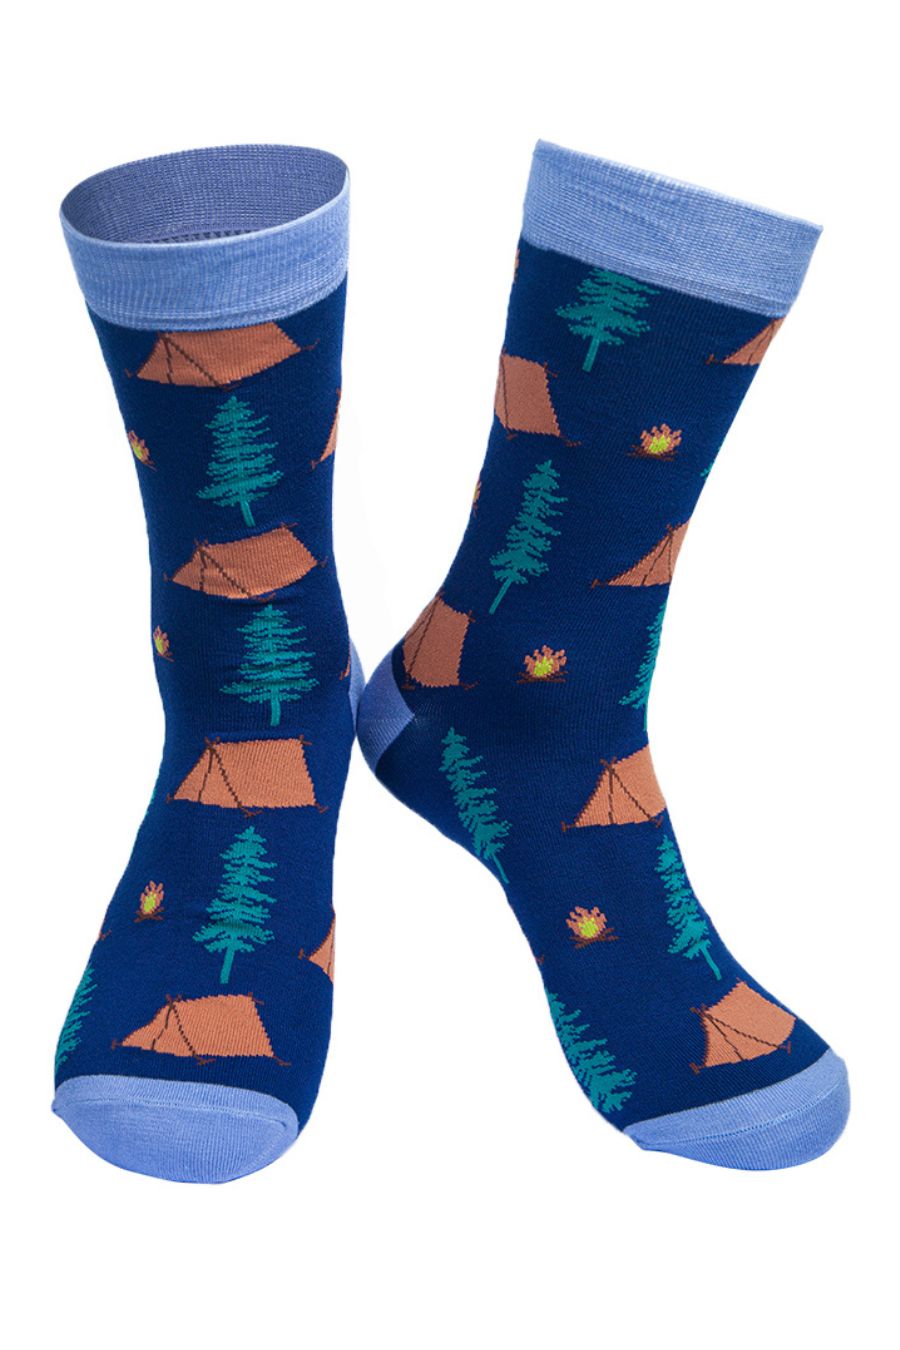 blue bamboo dress socks with a pattern of tents, trees and campfires all over